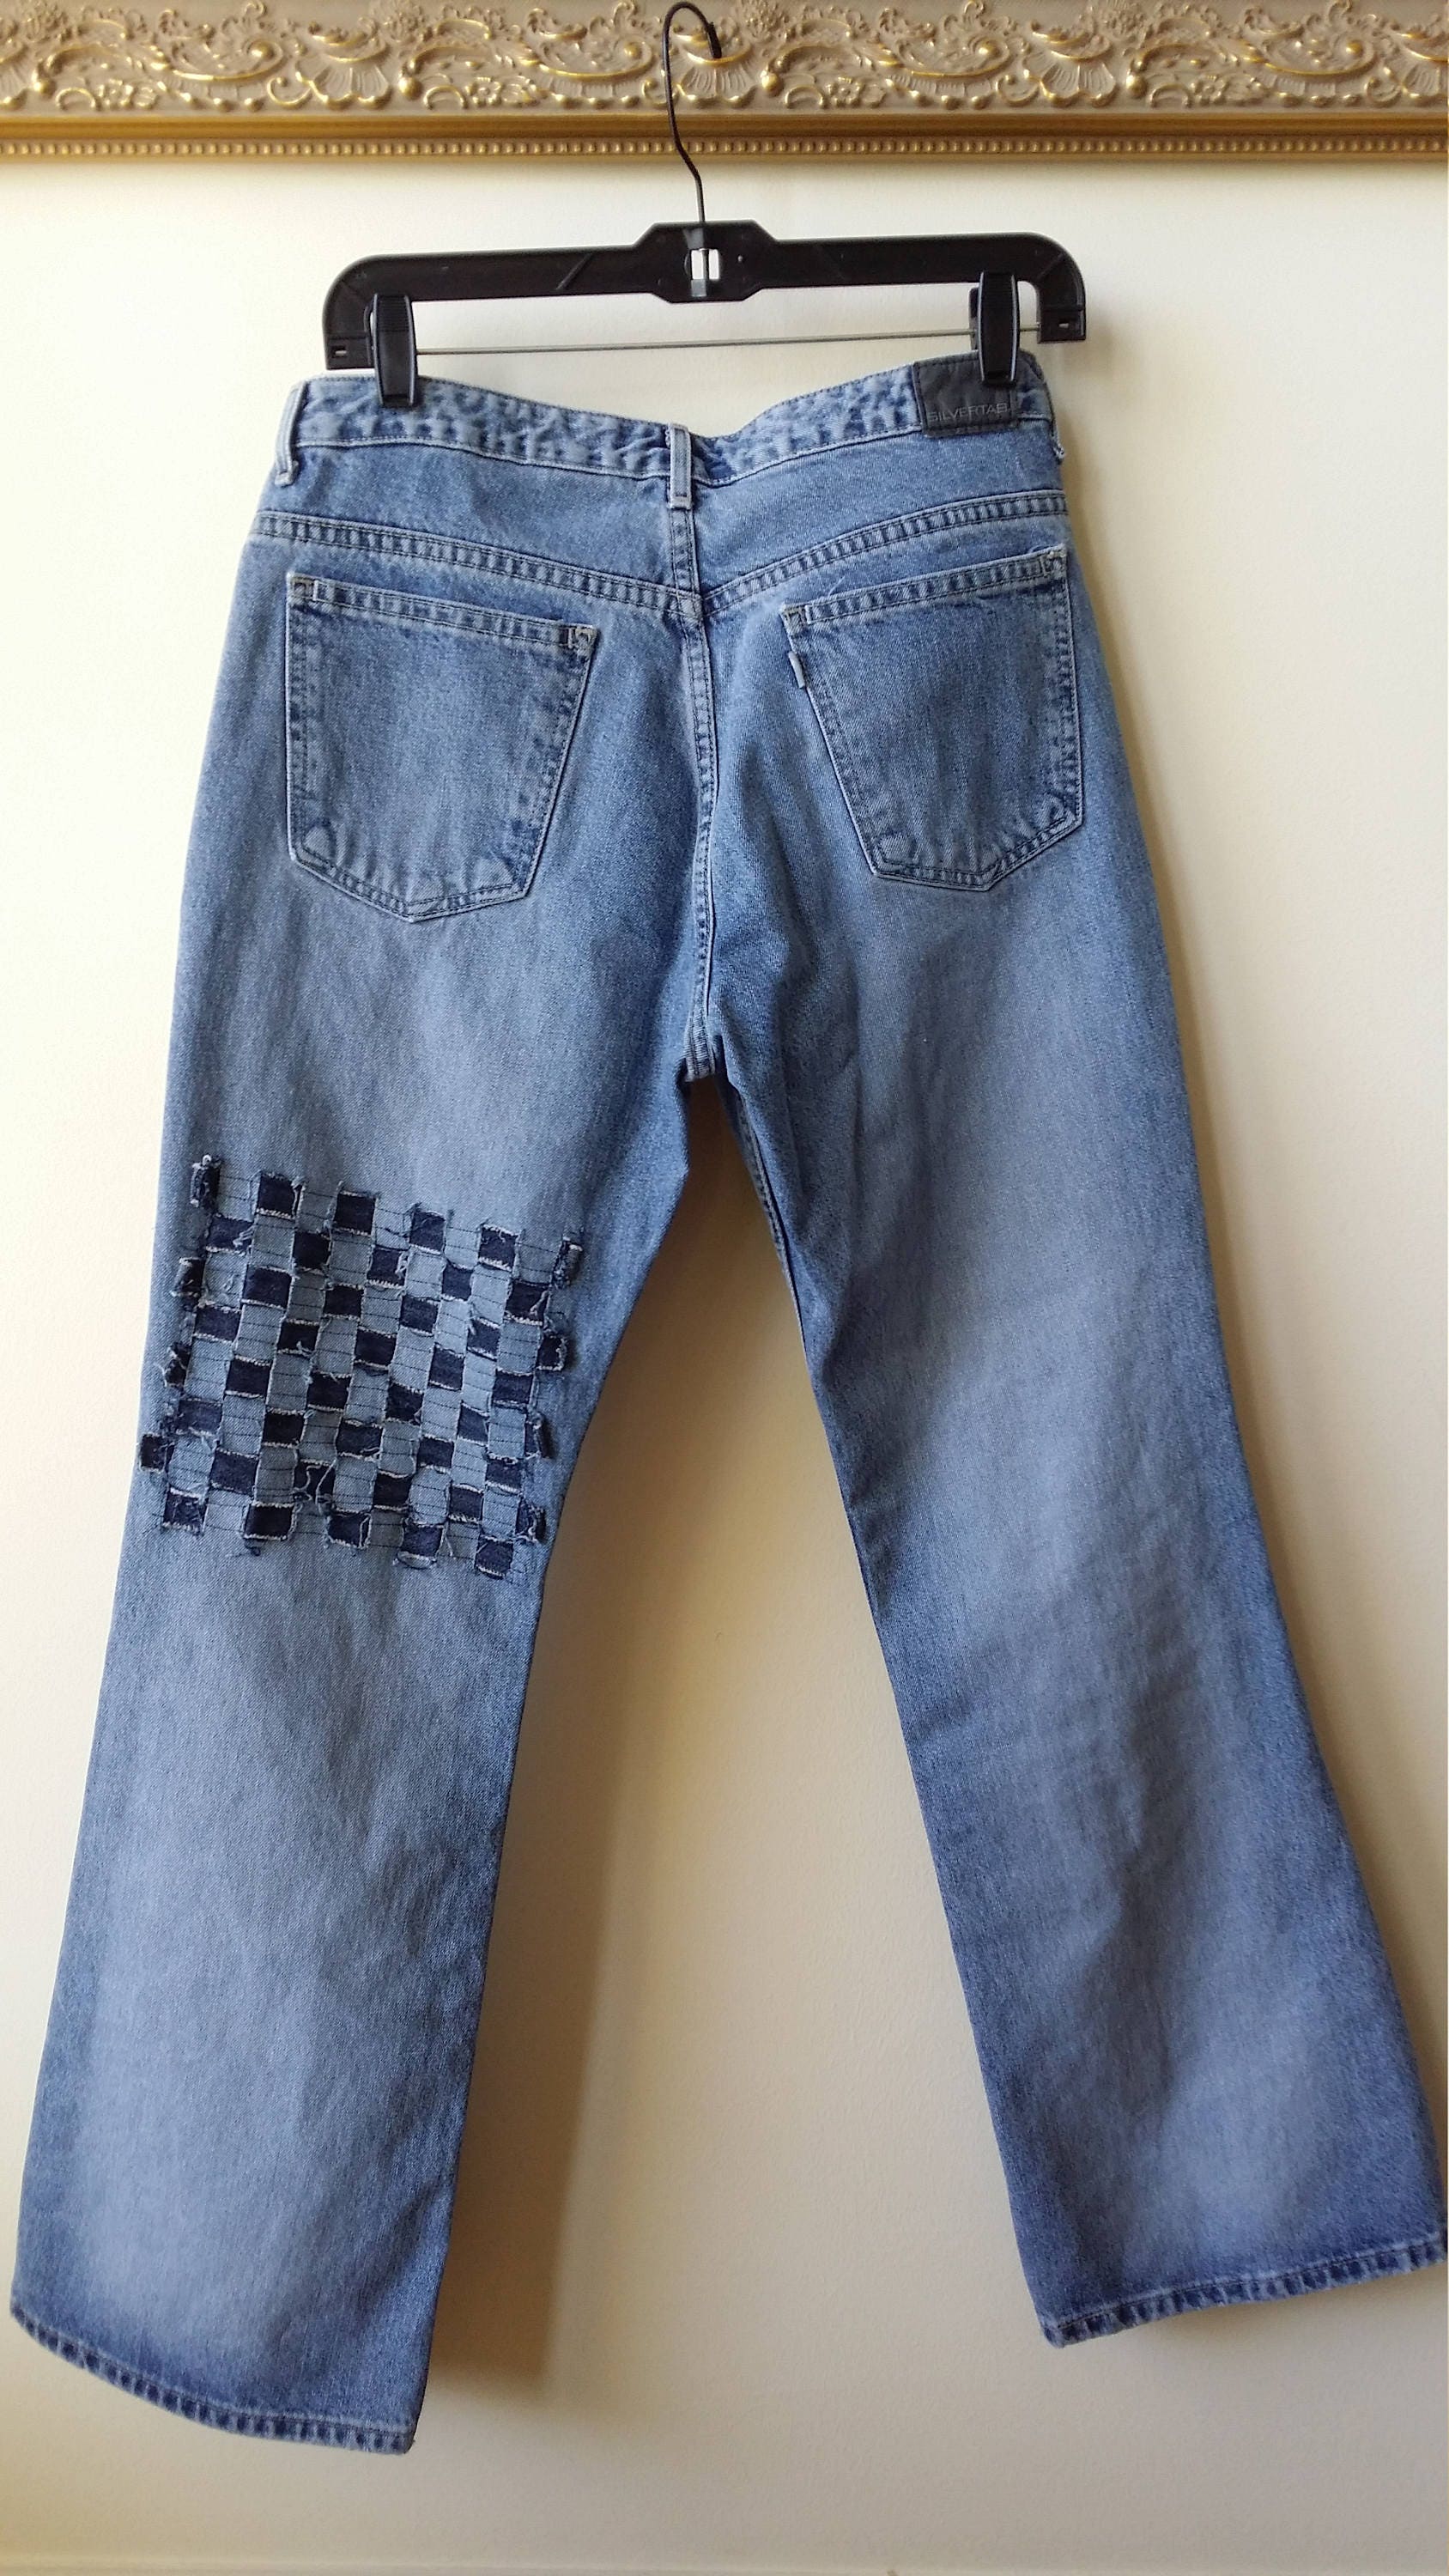 RESTYLED LEVIS JEANS With Hand-woven Design, Size 9 - Etsy